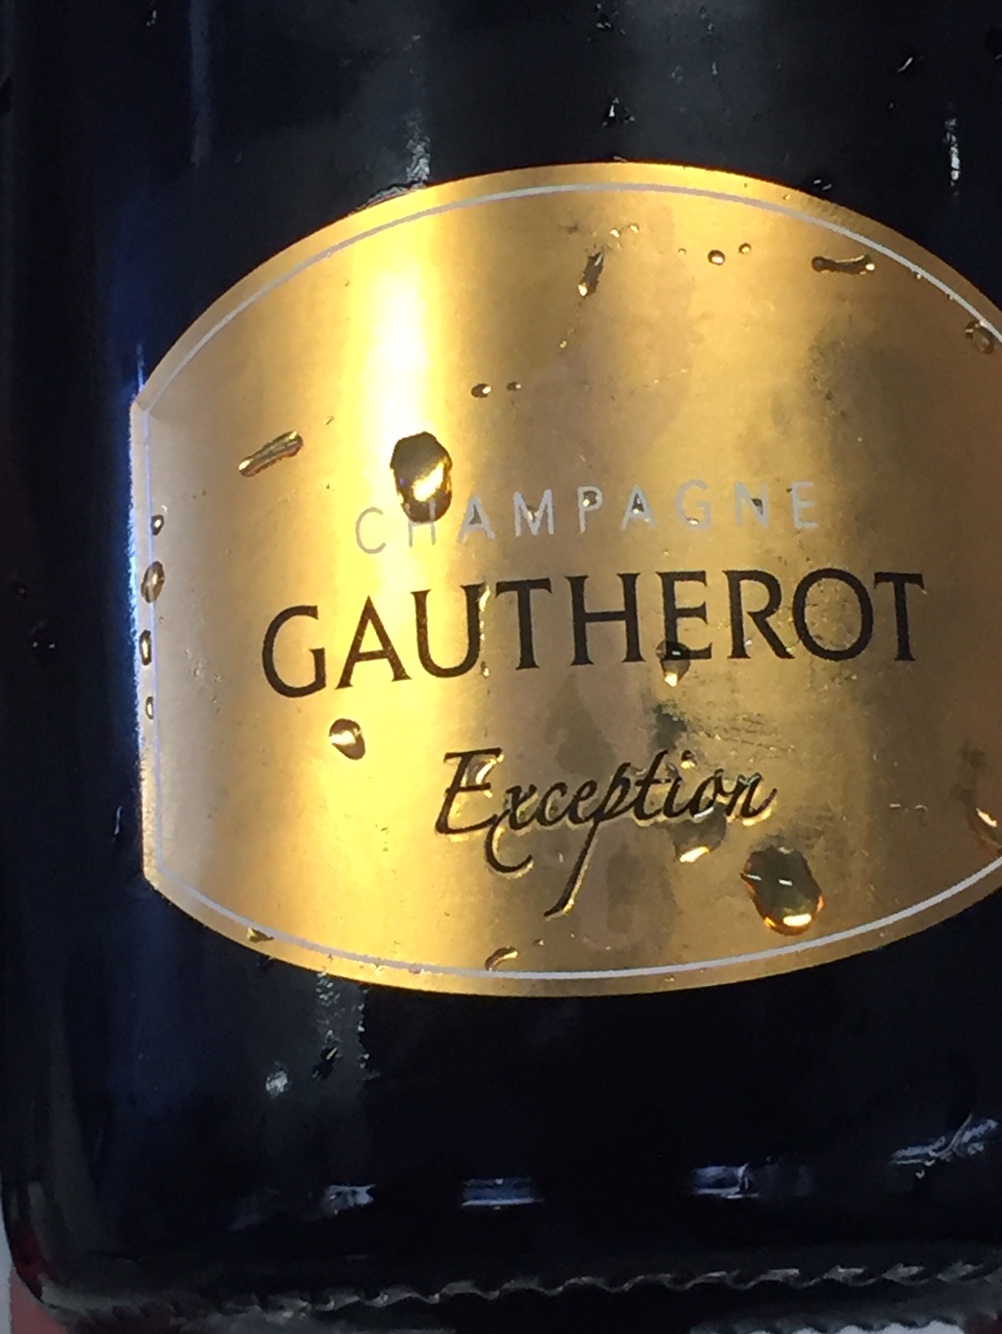 Champagne Gauthierot Exception Modena Champagne Experience